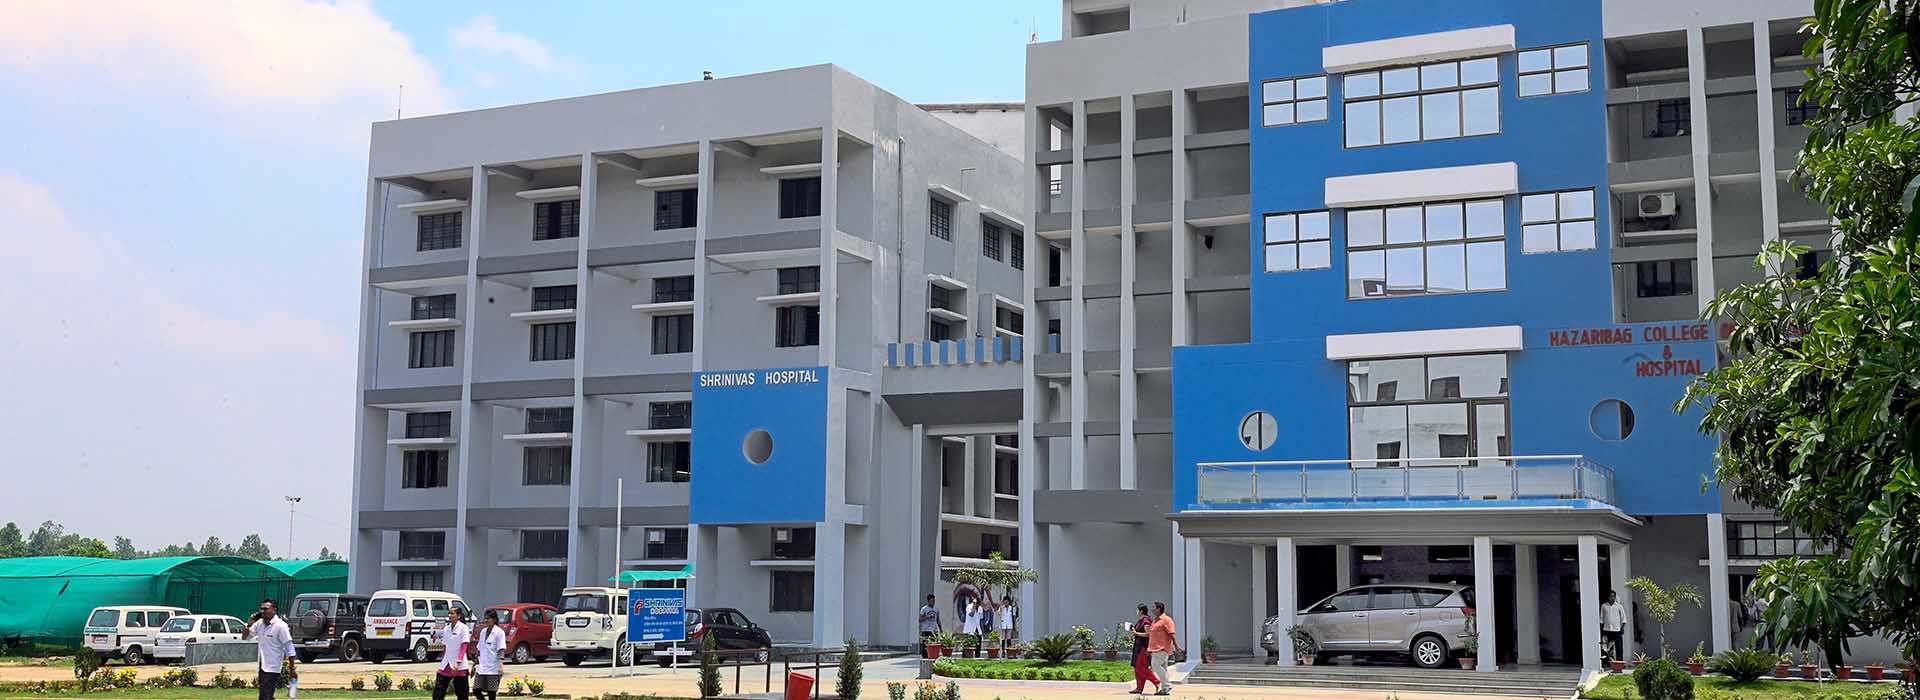 Hazaribagh Dental College Admission, Eligibility, Courses, Fees,